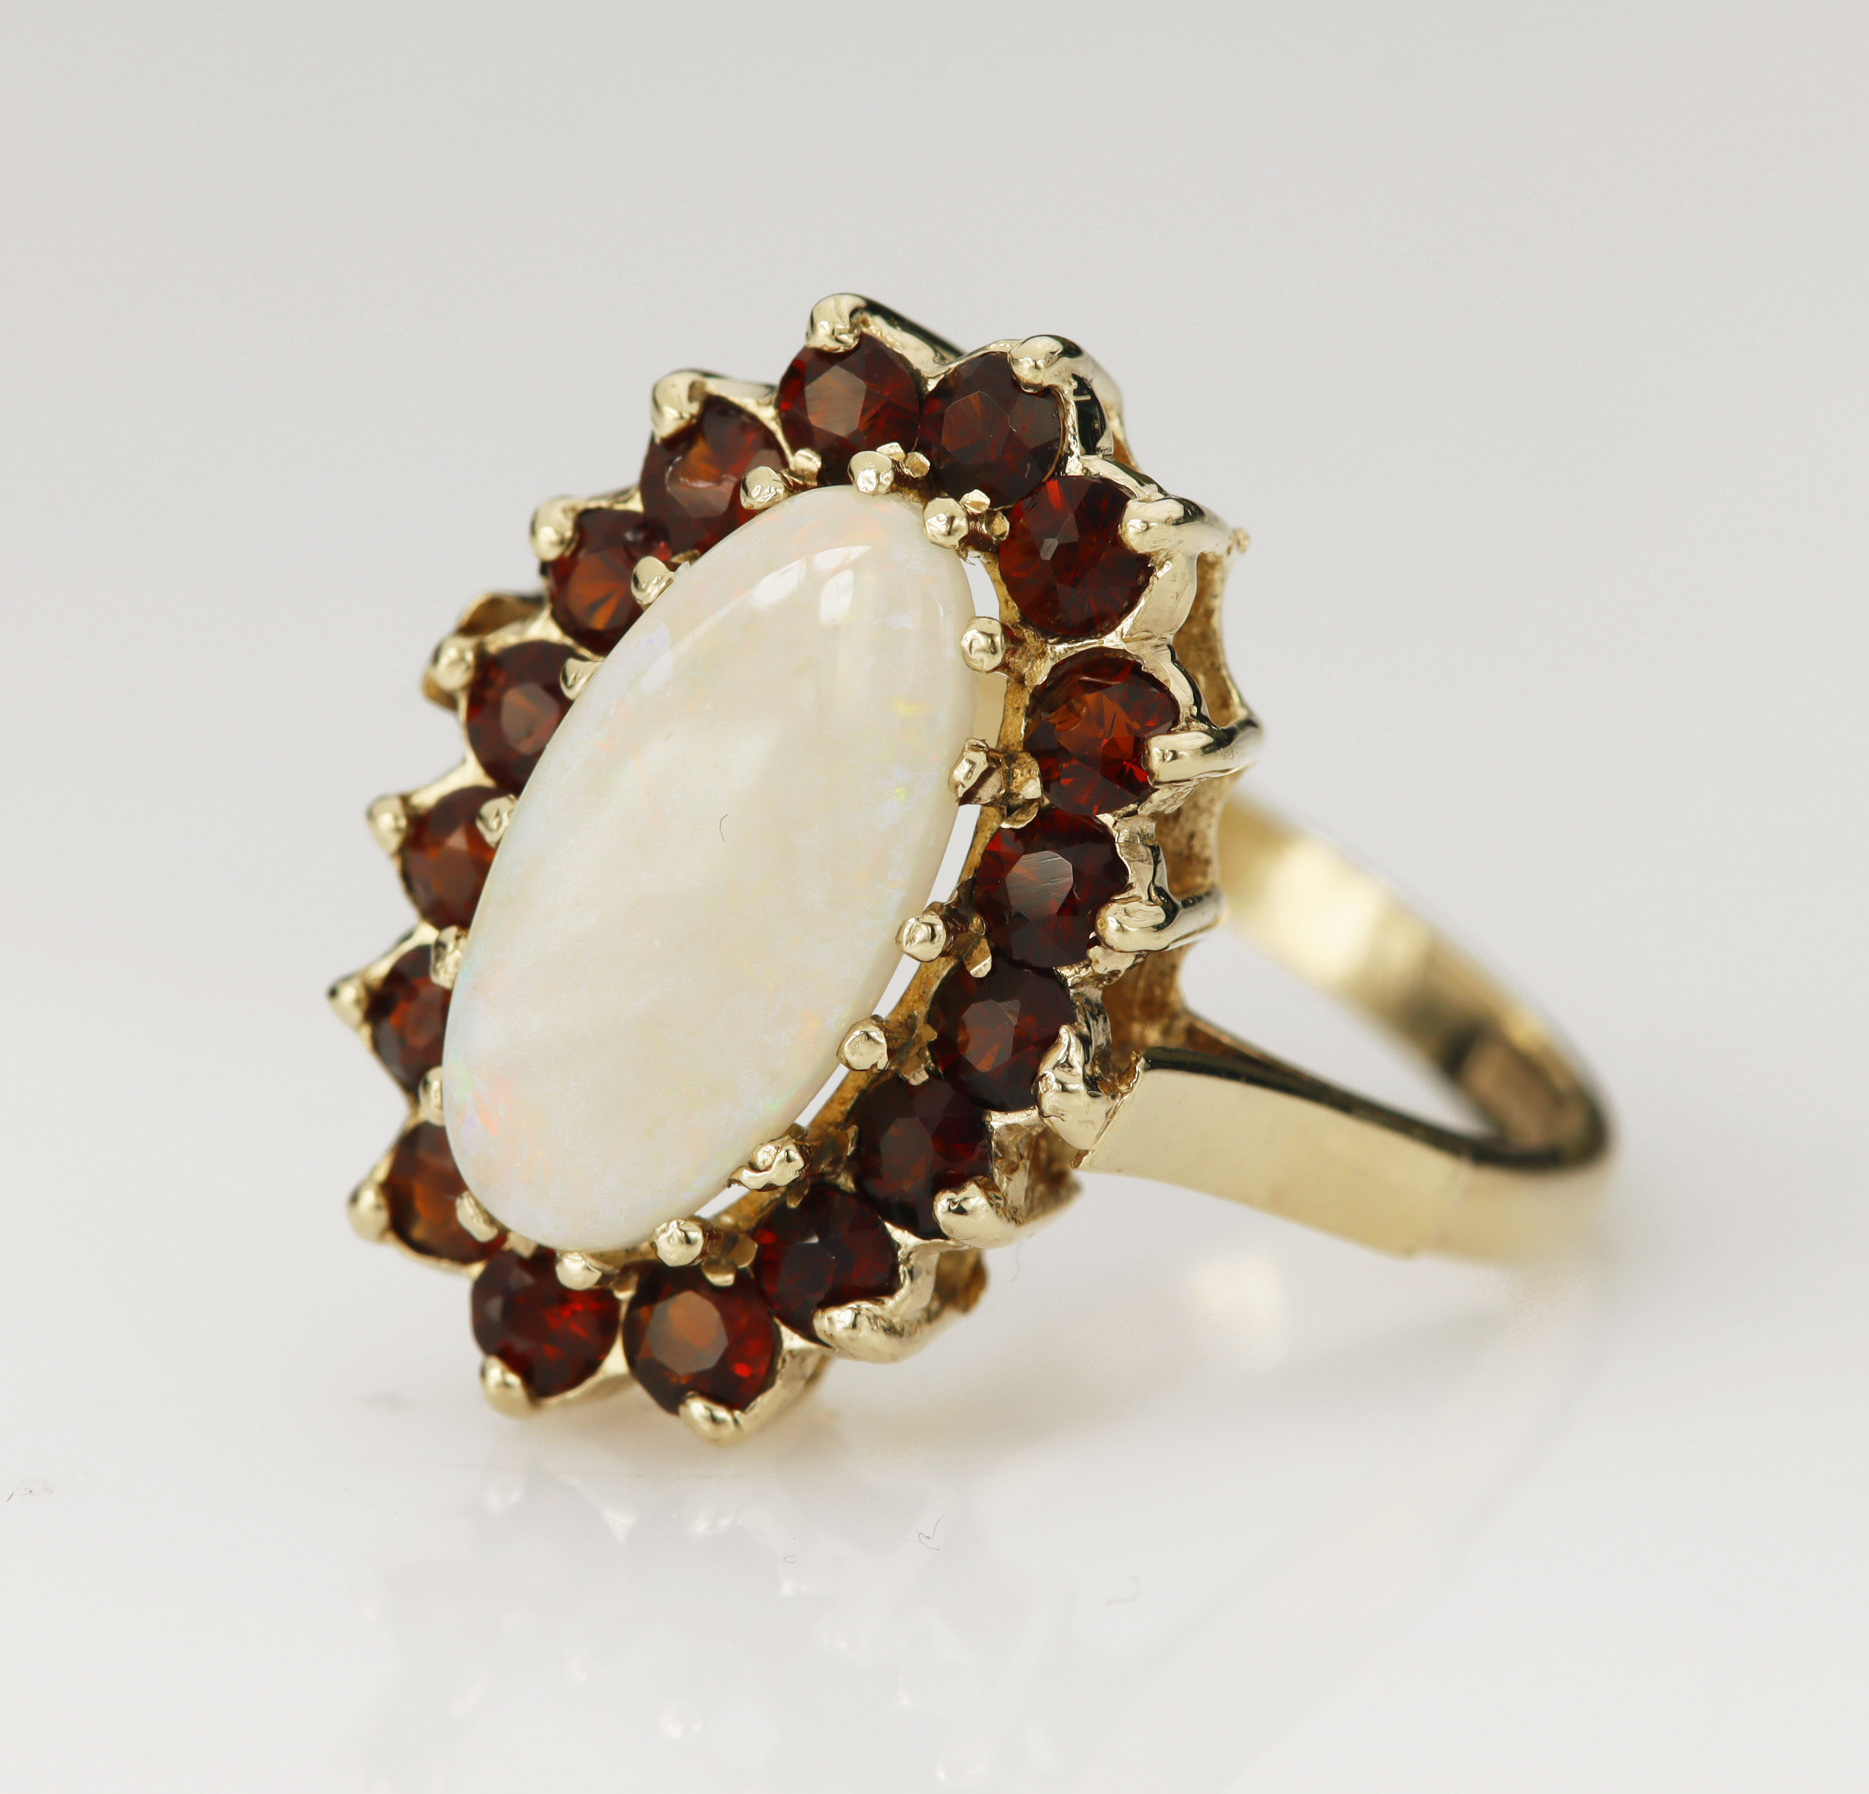 9ct yellow gold opal and garnet cluster dress ring, oval cabochon opal measures 13.8mm x 7mm,